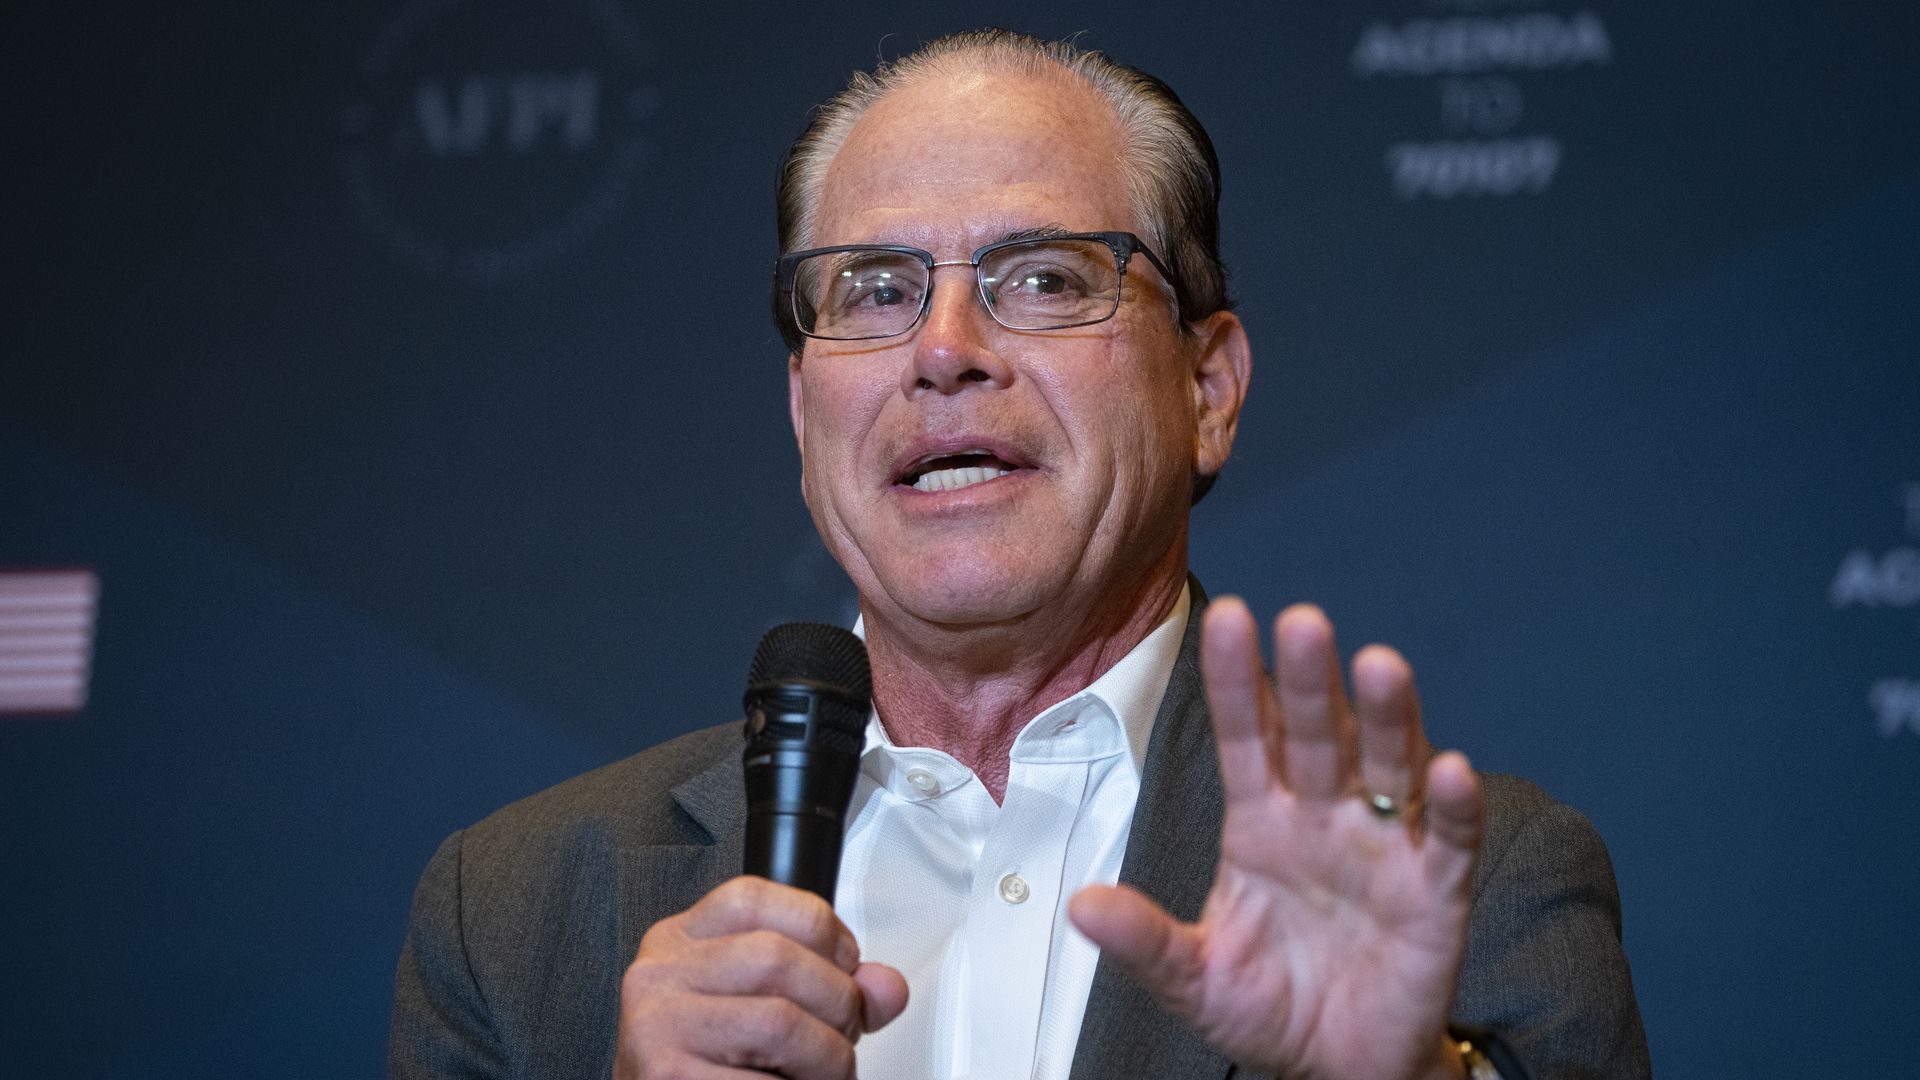 Senator Mike Braun, a Republican from Indiana, speaks during the America First Policy Institute's America First Agenda Summit.